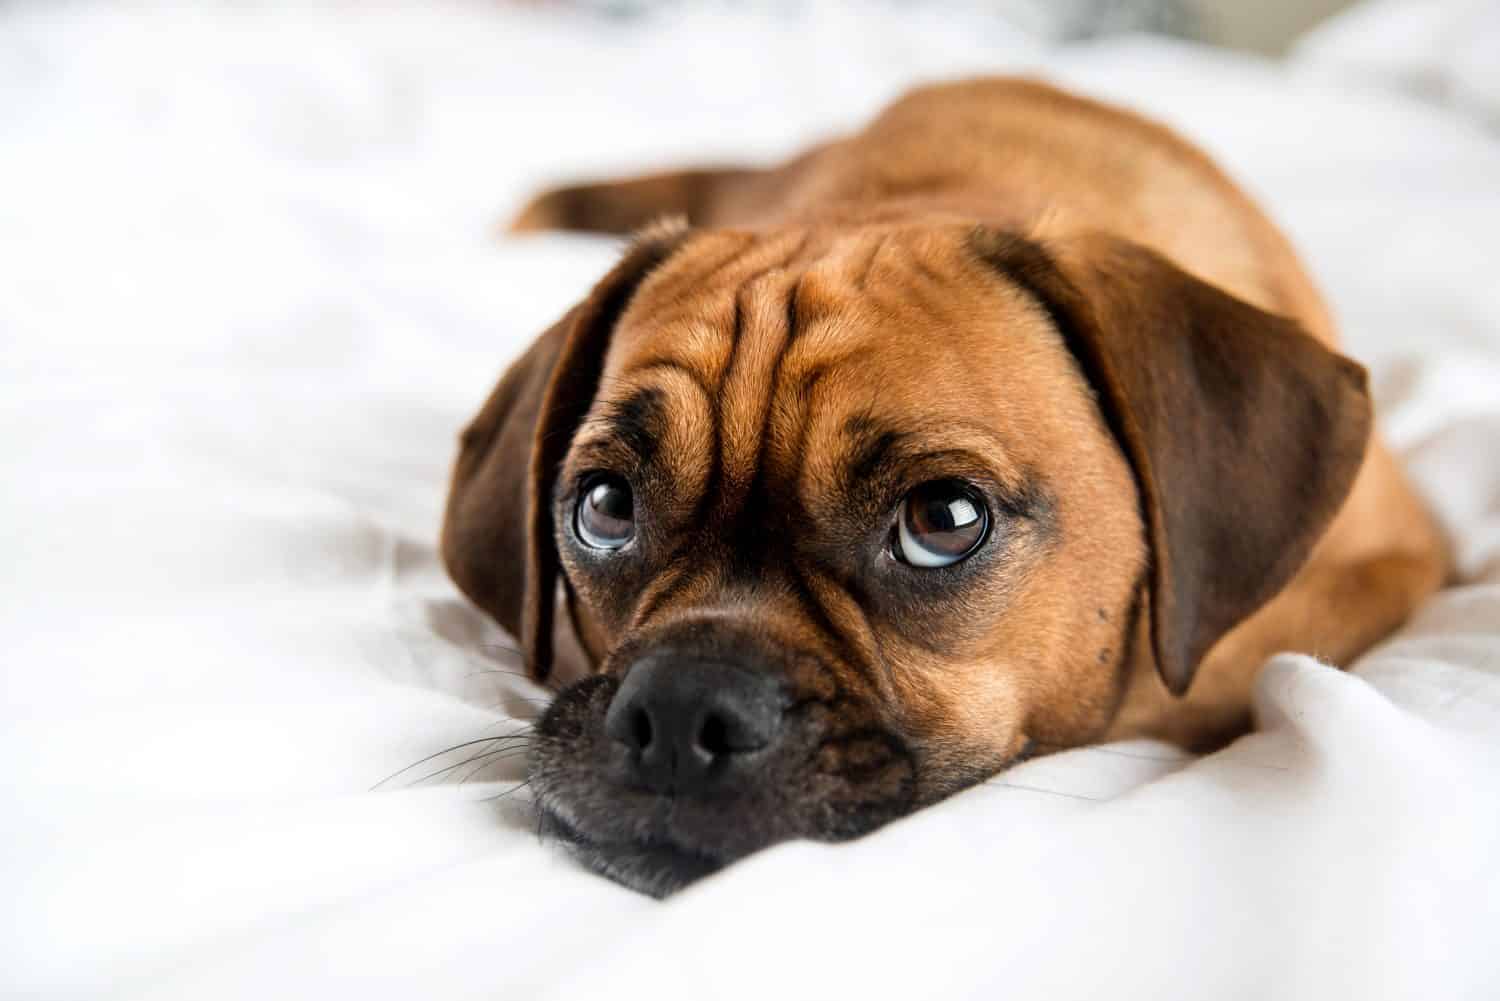 Cute Puggle Sleeping in Owners Bed on White Sheets